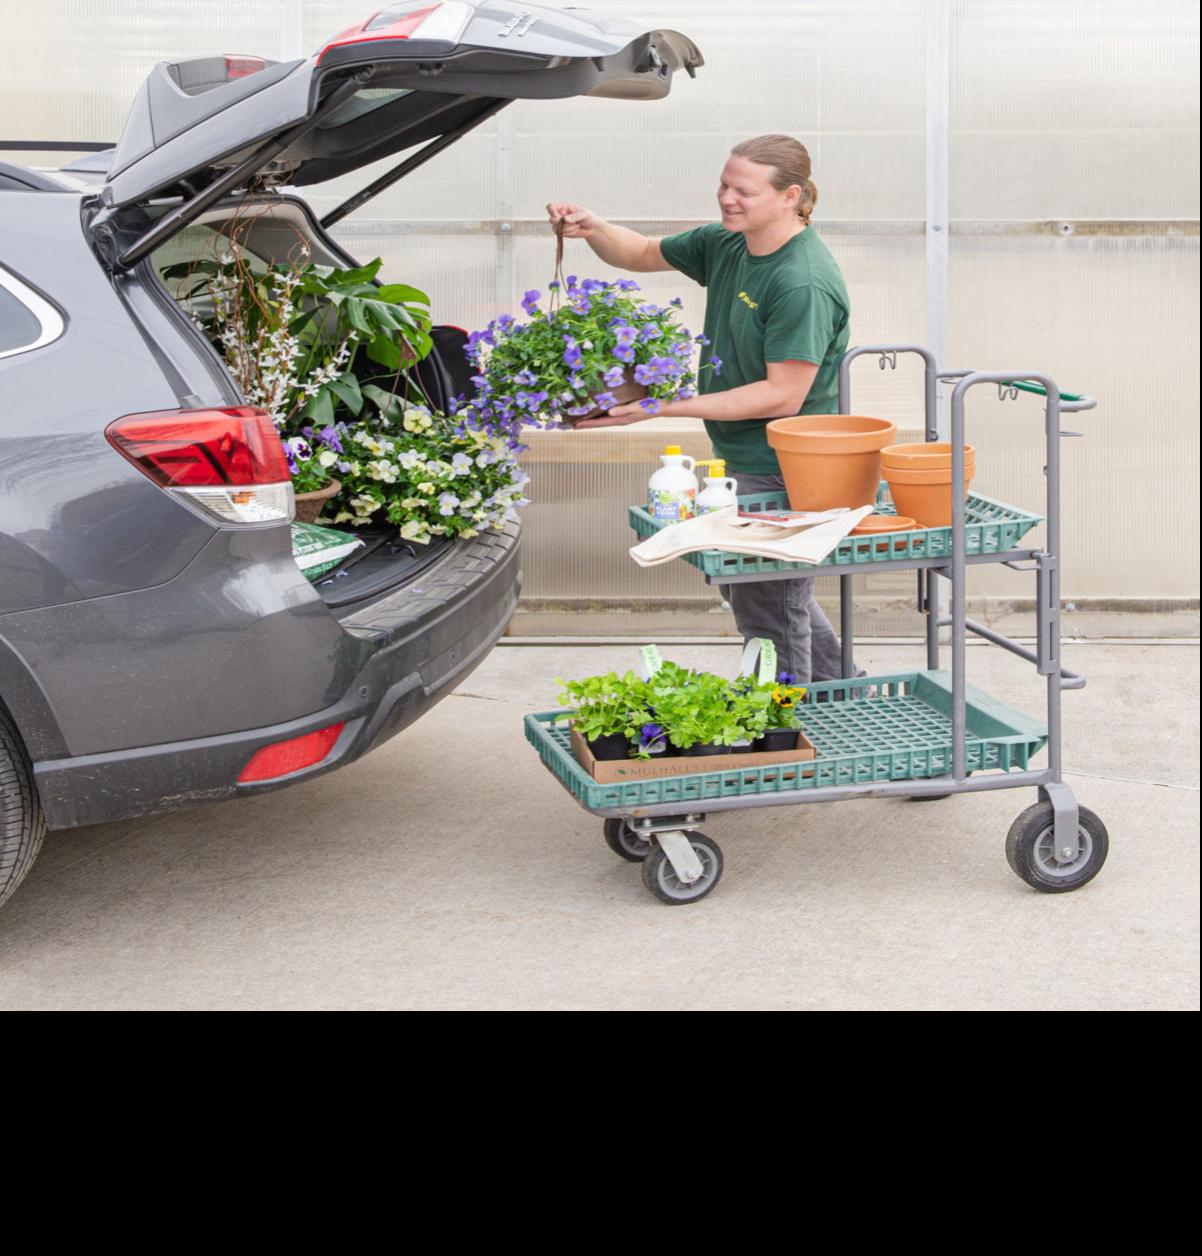 Omaha Area Garden Centers Find Ways To Safely Serve Customers